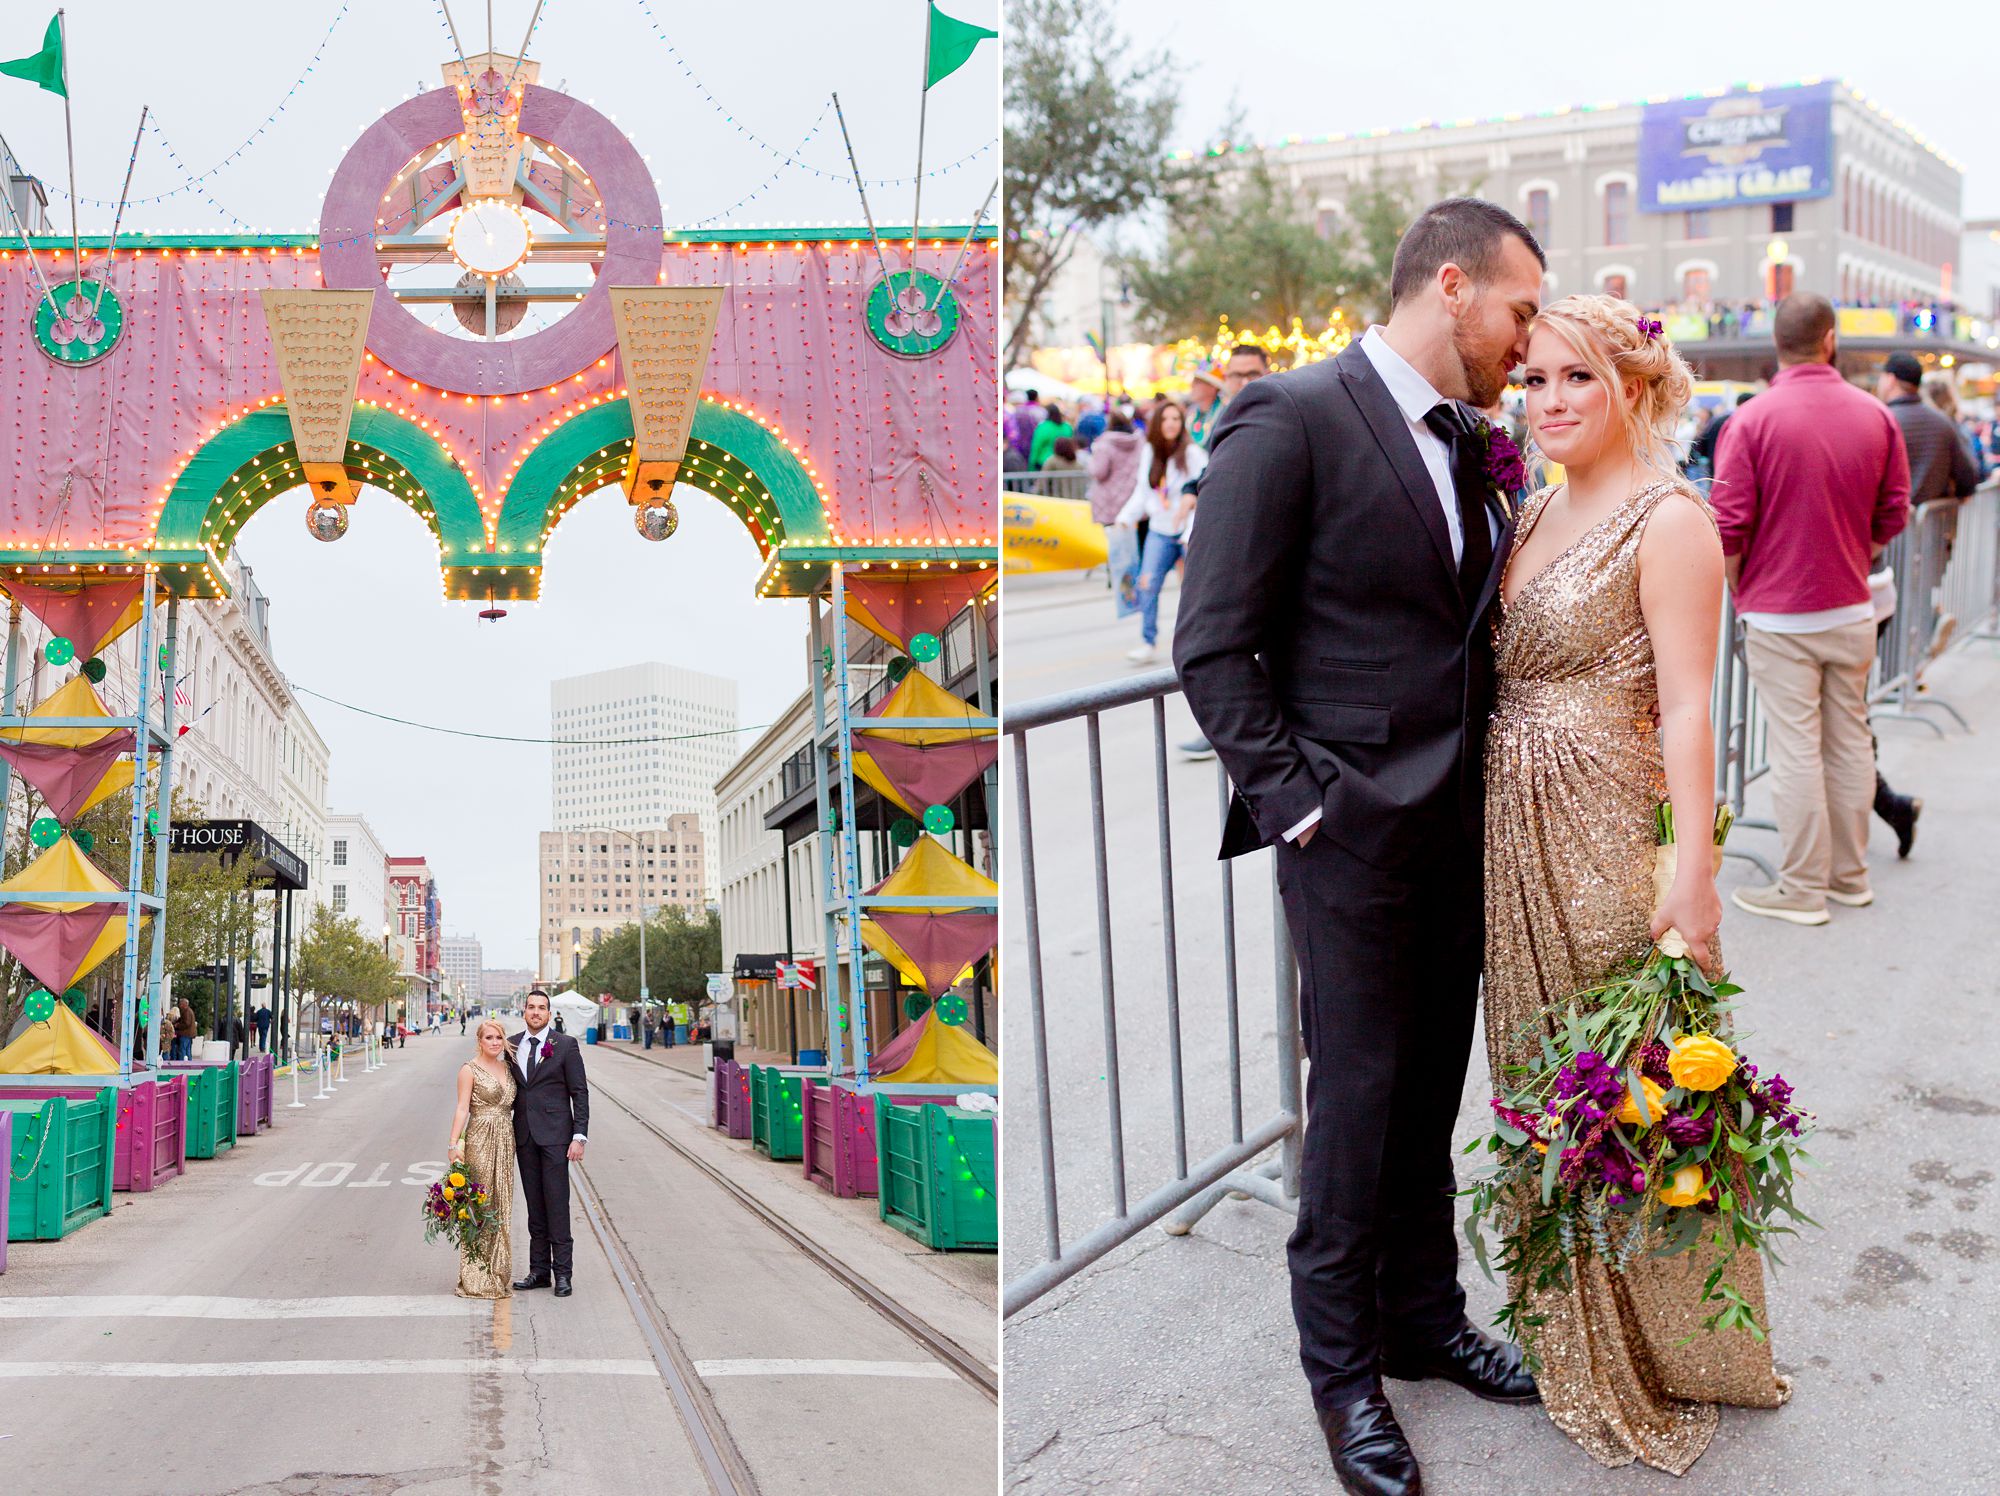 A bride and groom at their Mardi Gras elopement.